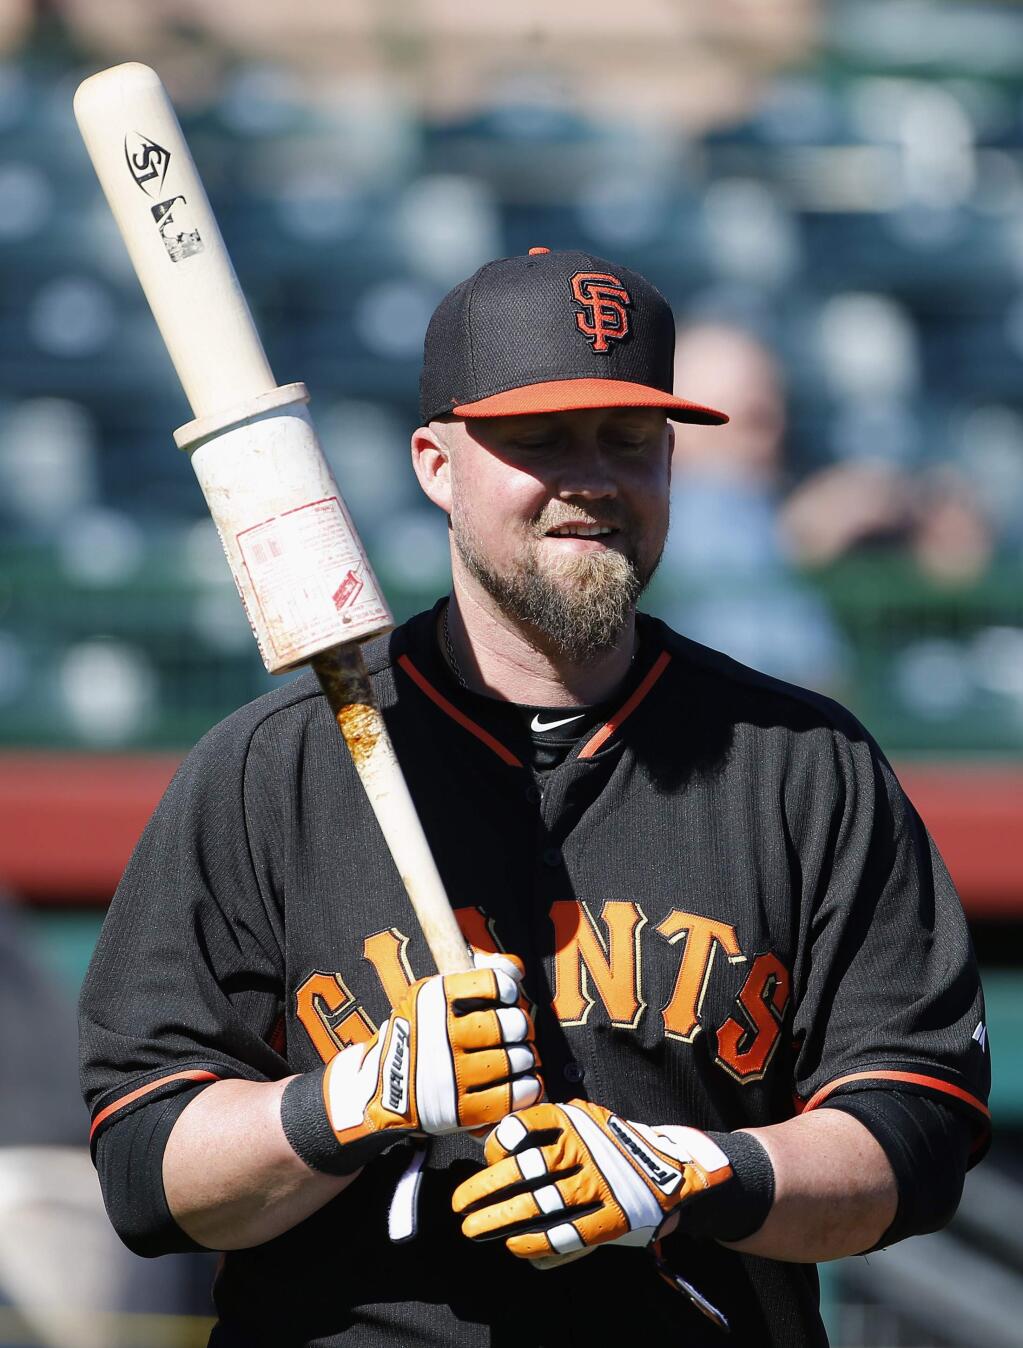 San Francisco Giants' Casey McGehee waits to bat during spring training Wednesday, Feb. 25, 2015, in Scottsdale, Ariz. (AP Photo/Ross D. Franklin)